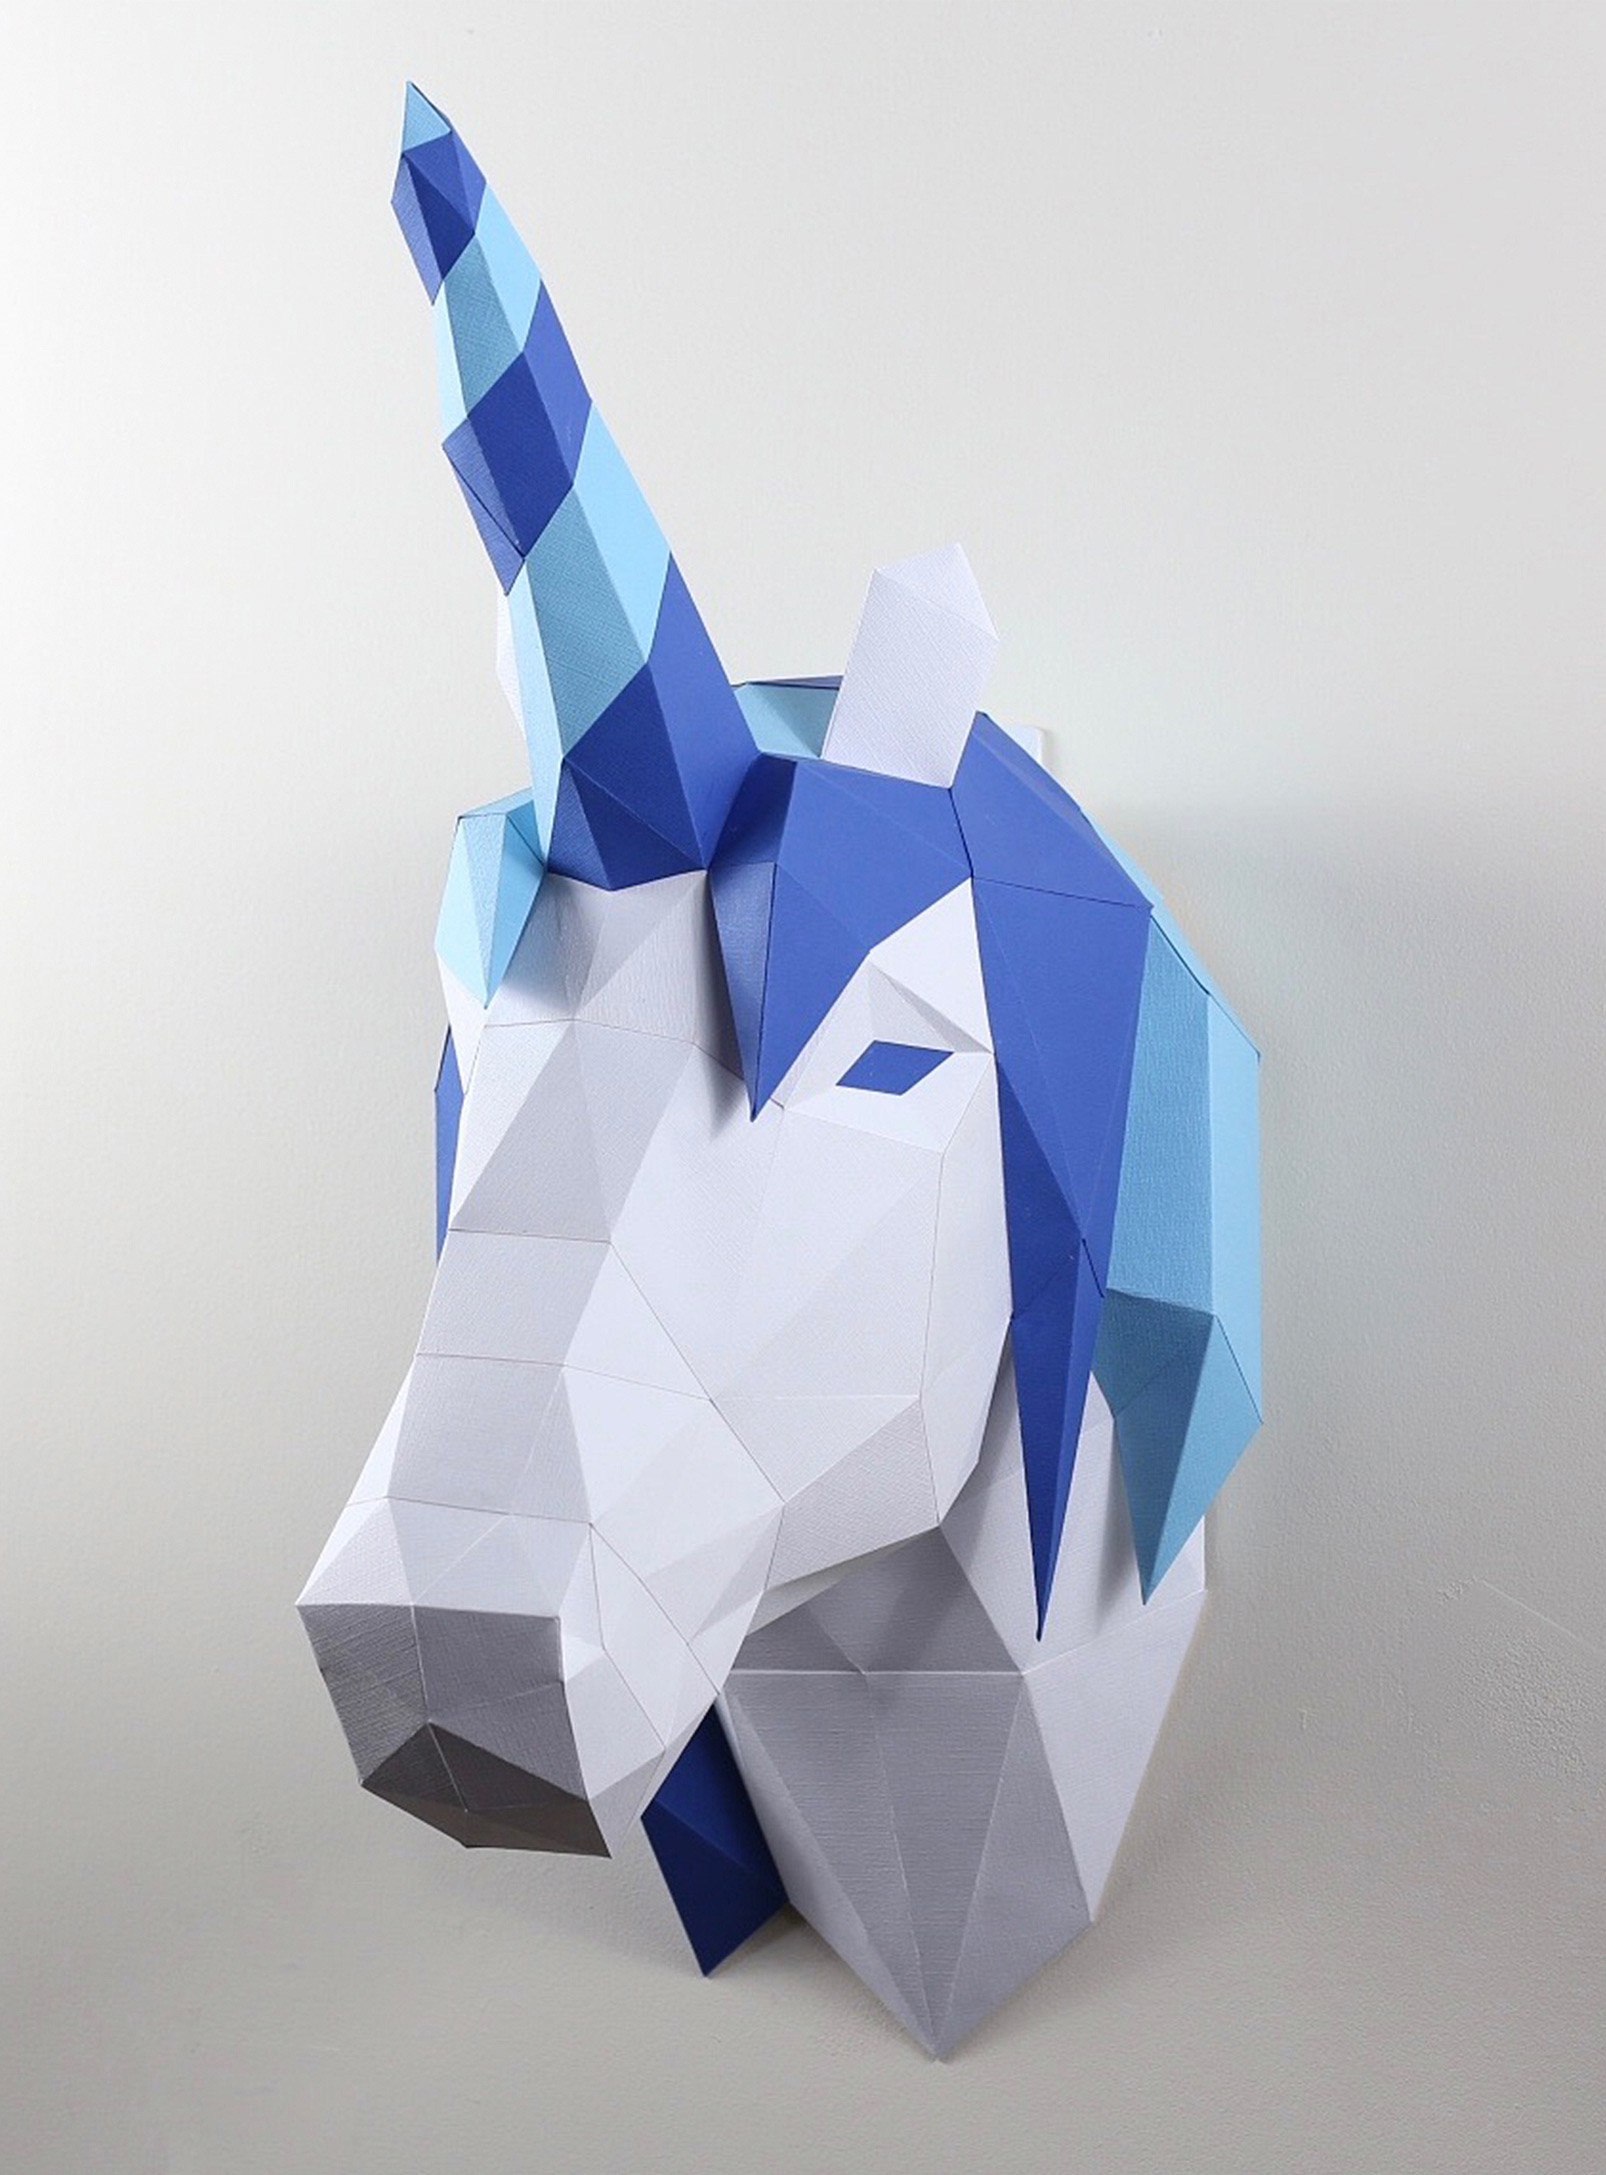 a 3D paper puzzle of a unicorn mounted on the wall